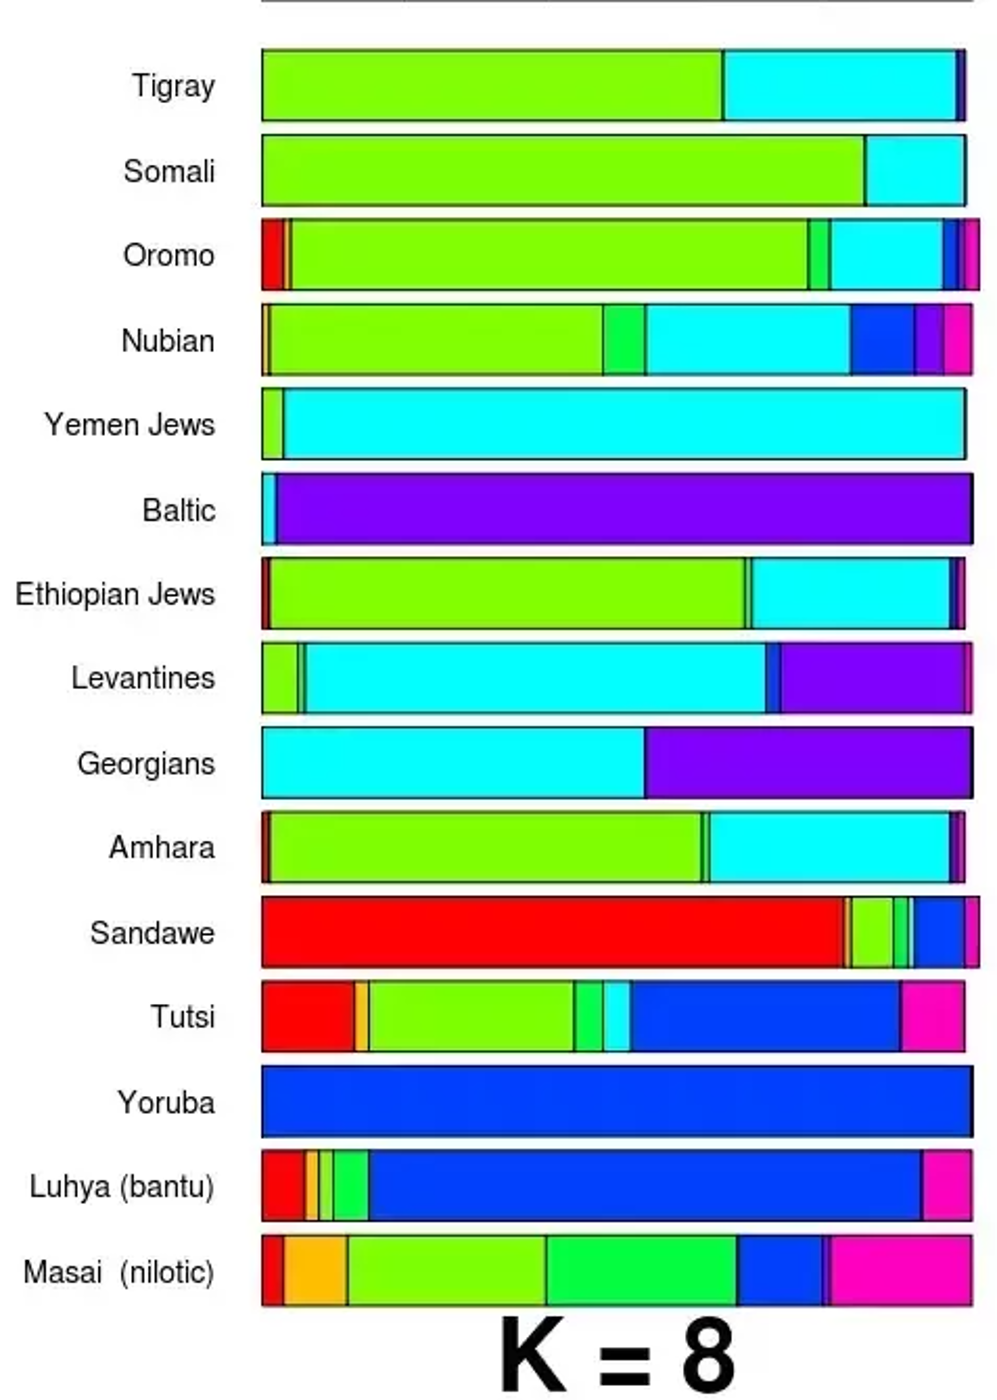 Admixture analysis of Tutsi Bantus and other global populations. The examined Tutsi individuals trace most of their ancestry to Sub-Saharan ancestral sources (over 70% on average), comprising Niger-Congo (blue component), Nilo-Saharan (dark green component), Pygmy (pink component), and hunter-gatherer (red component) genome elements. They also have some Eurasian-related admixture derived from Cushitic peoples (~30% of the light green component, which peaks among the Southern Somali sample). This concurs with the commercial genetic tests above of Bantu-speaking Tutsi individuals..